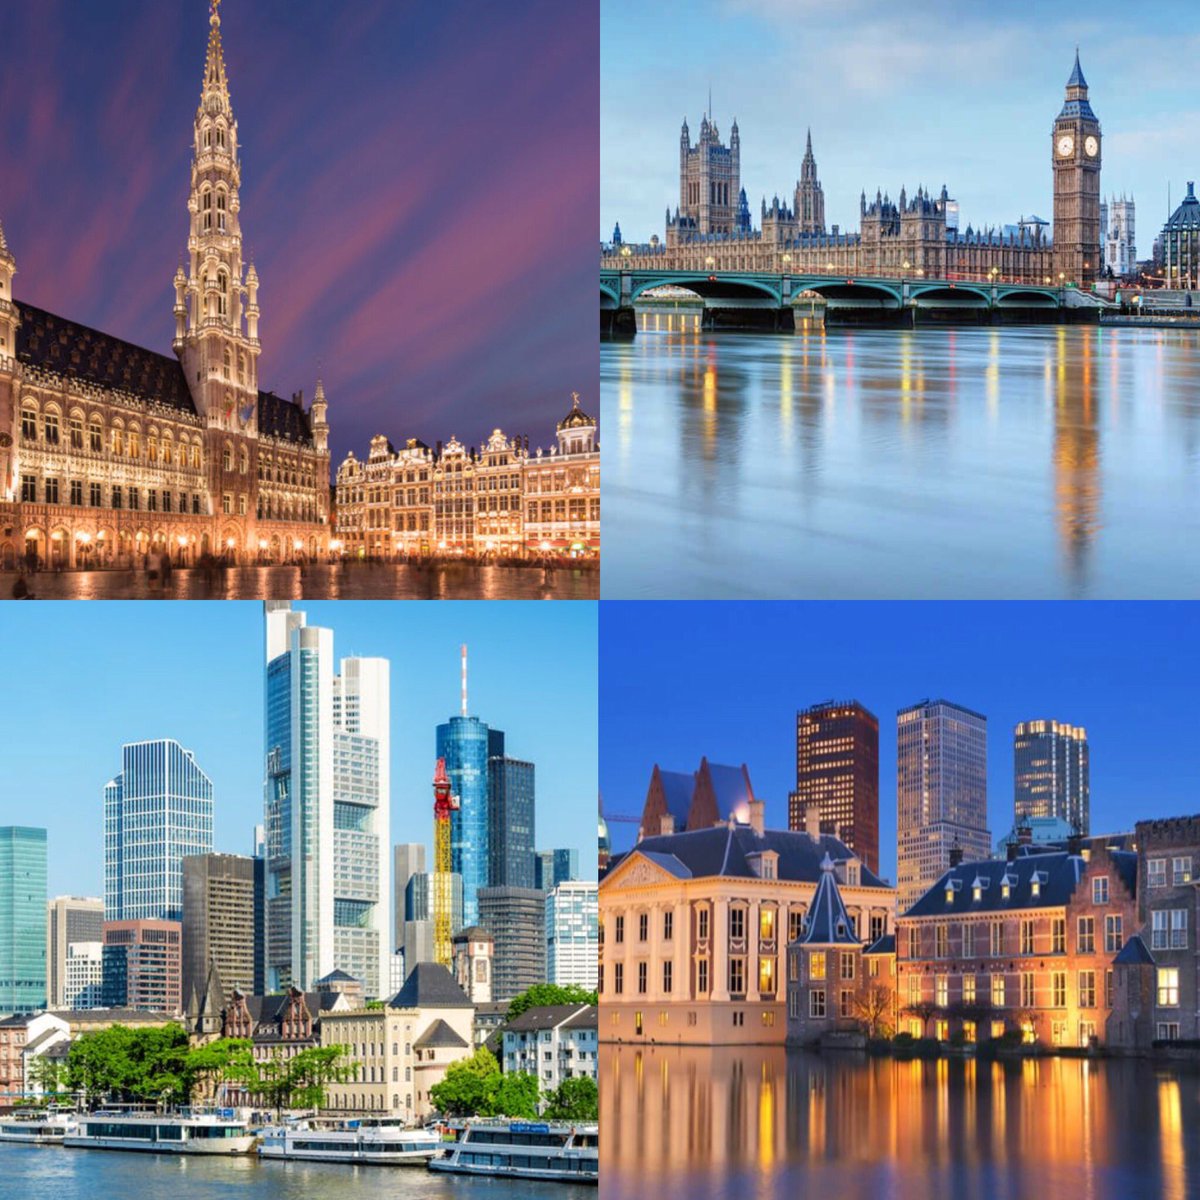 4 days, 4 cities, 4x#TradeControls with 4 different focuses ! Join in #Brussels (11 June), #London (12 June), #Frankfurt (13 June) &TheHague (14 June). 🇪🇺&🇺🇸 perspectives. Check @iccwbo events calendar for more info: @iccwboUK @ICCBelgium @ICCNederland @ICC_Germany #OFAC